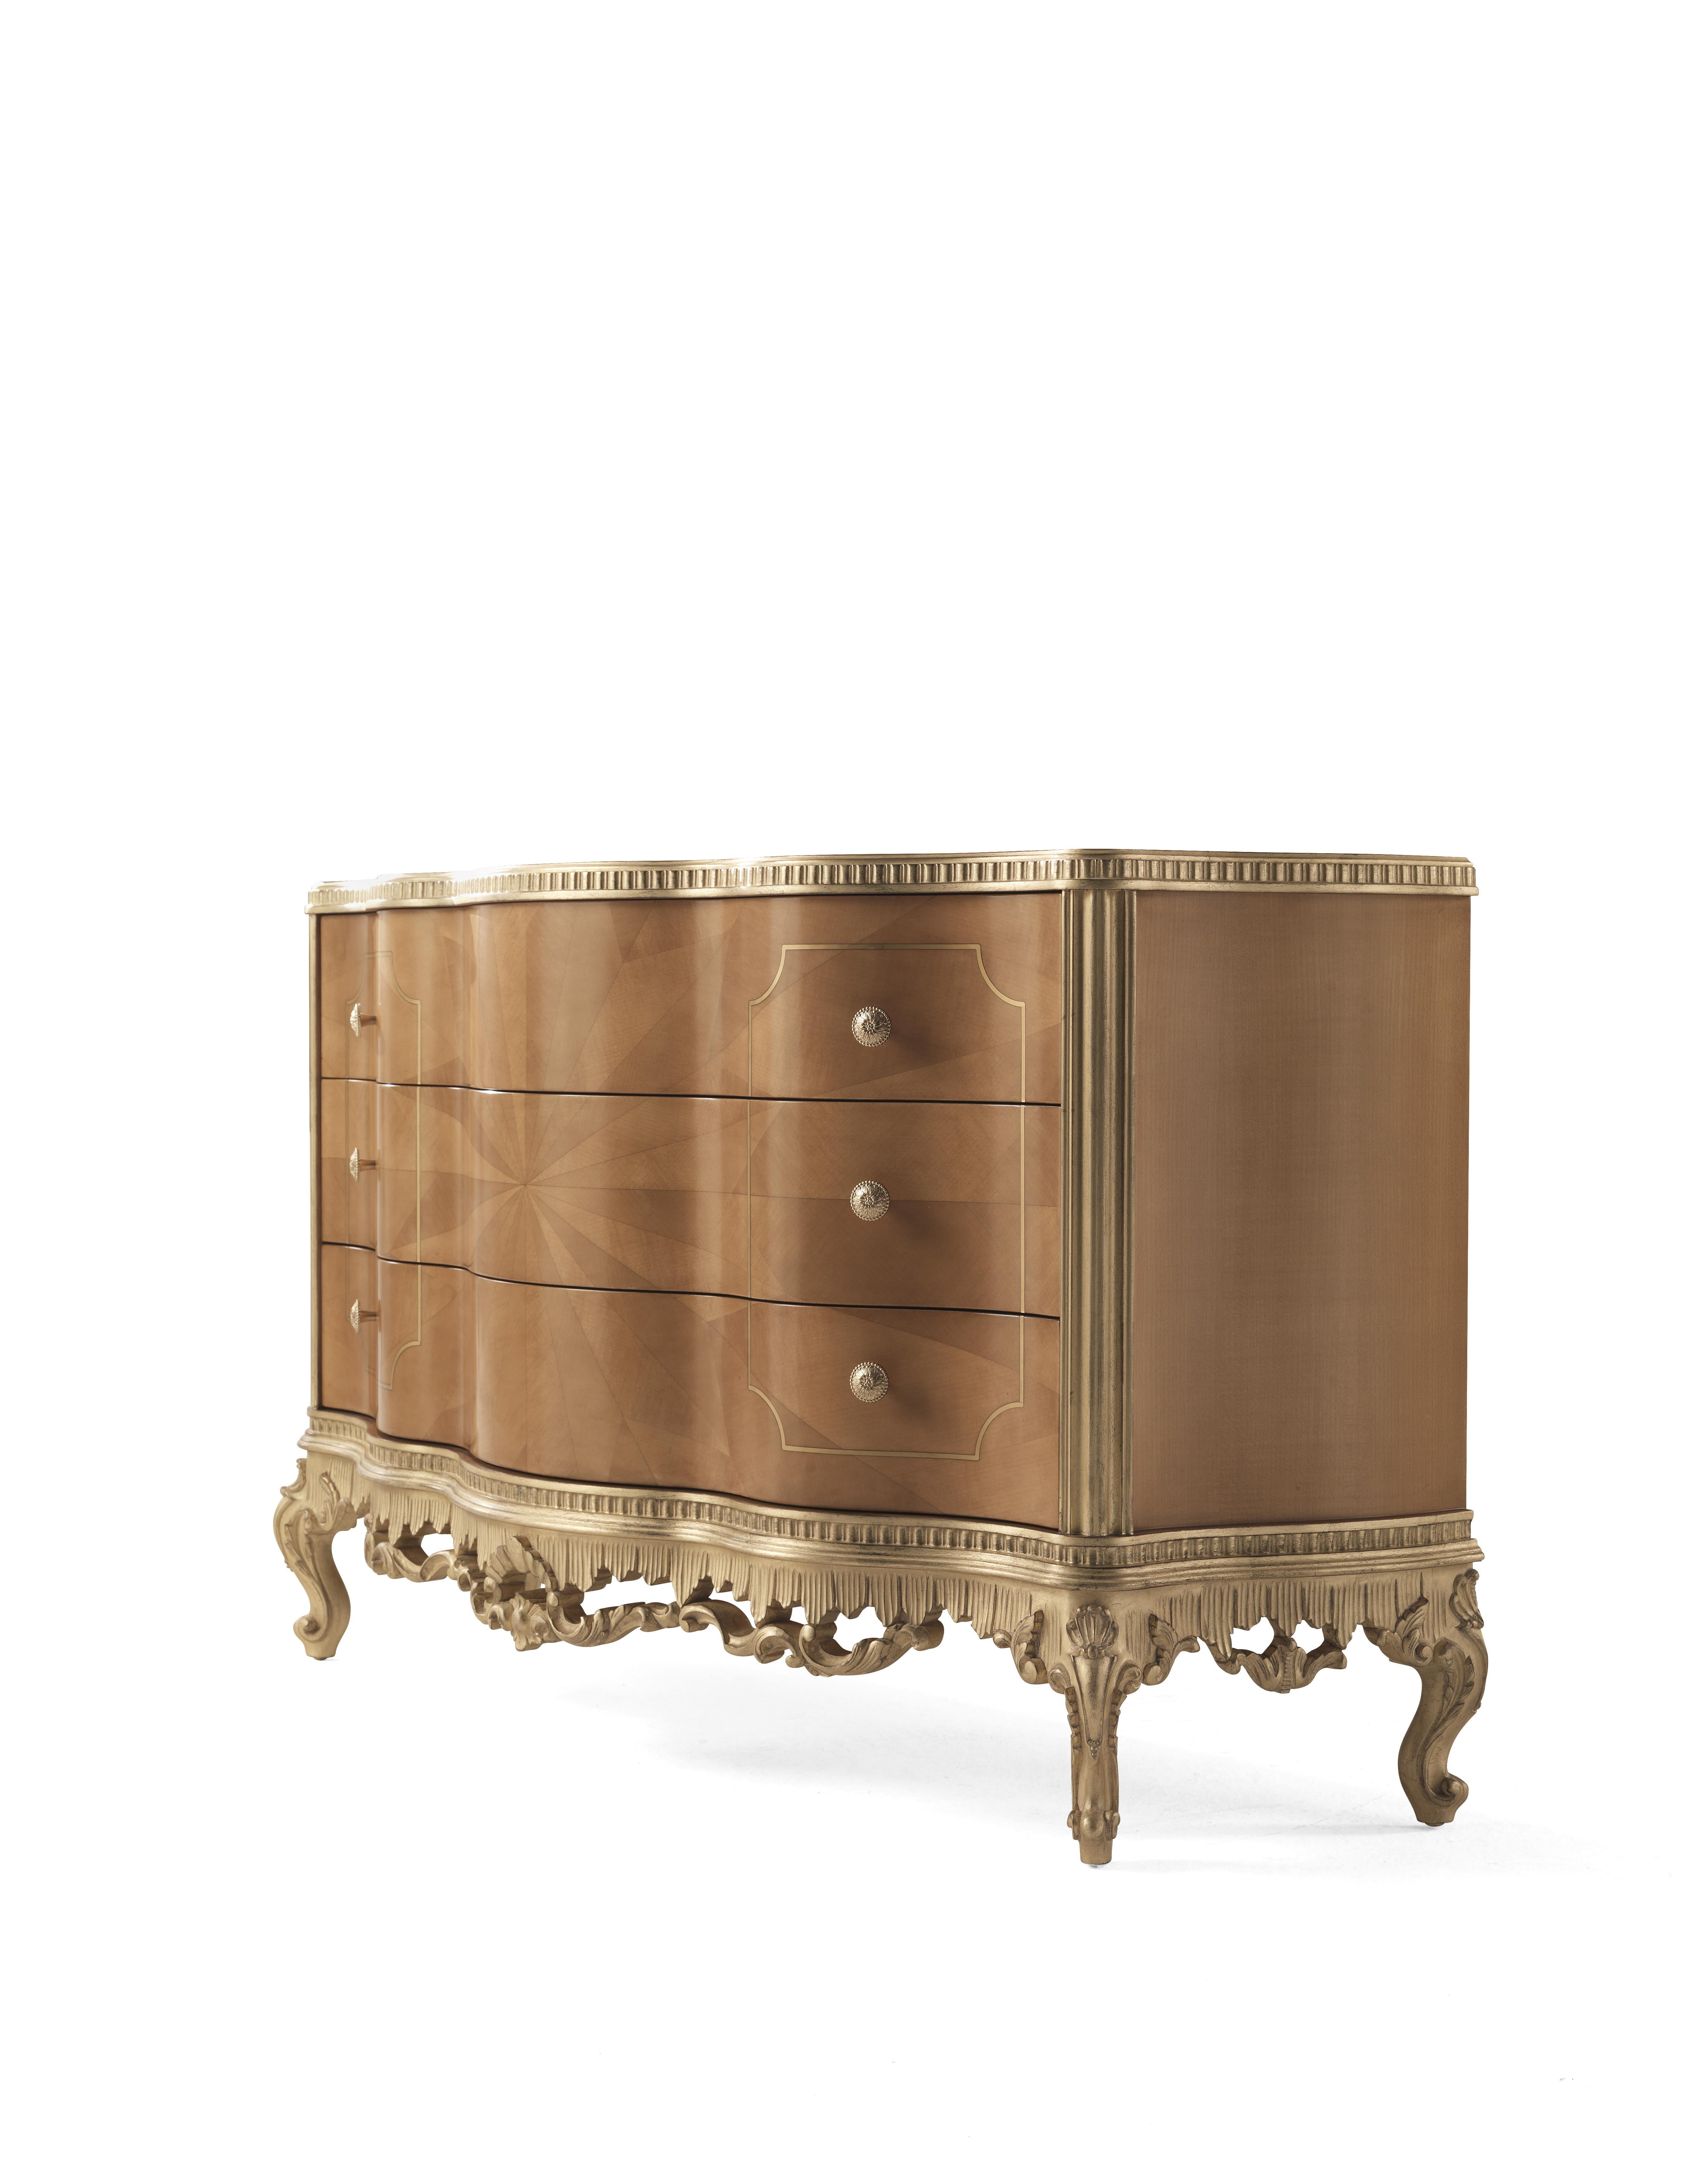 Ourlet is a line in a classic French style, expressing the refinement of the Italian artisan tradition. Made of maple, dyed in an elegant slightly darker shade, it features light and bright decorative brass inserts and it is enriched by